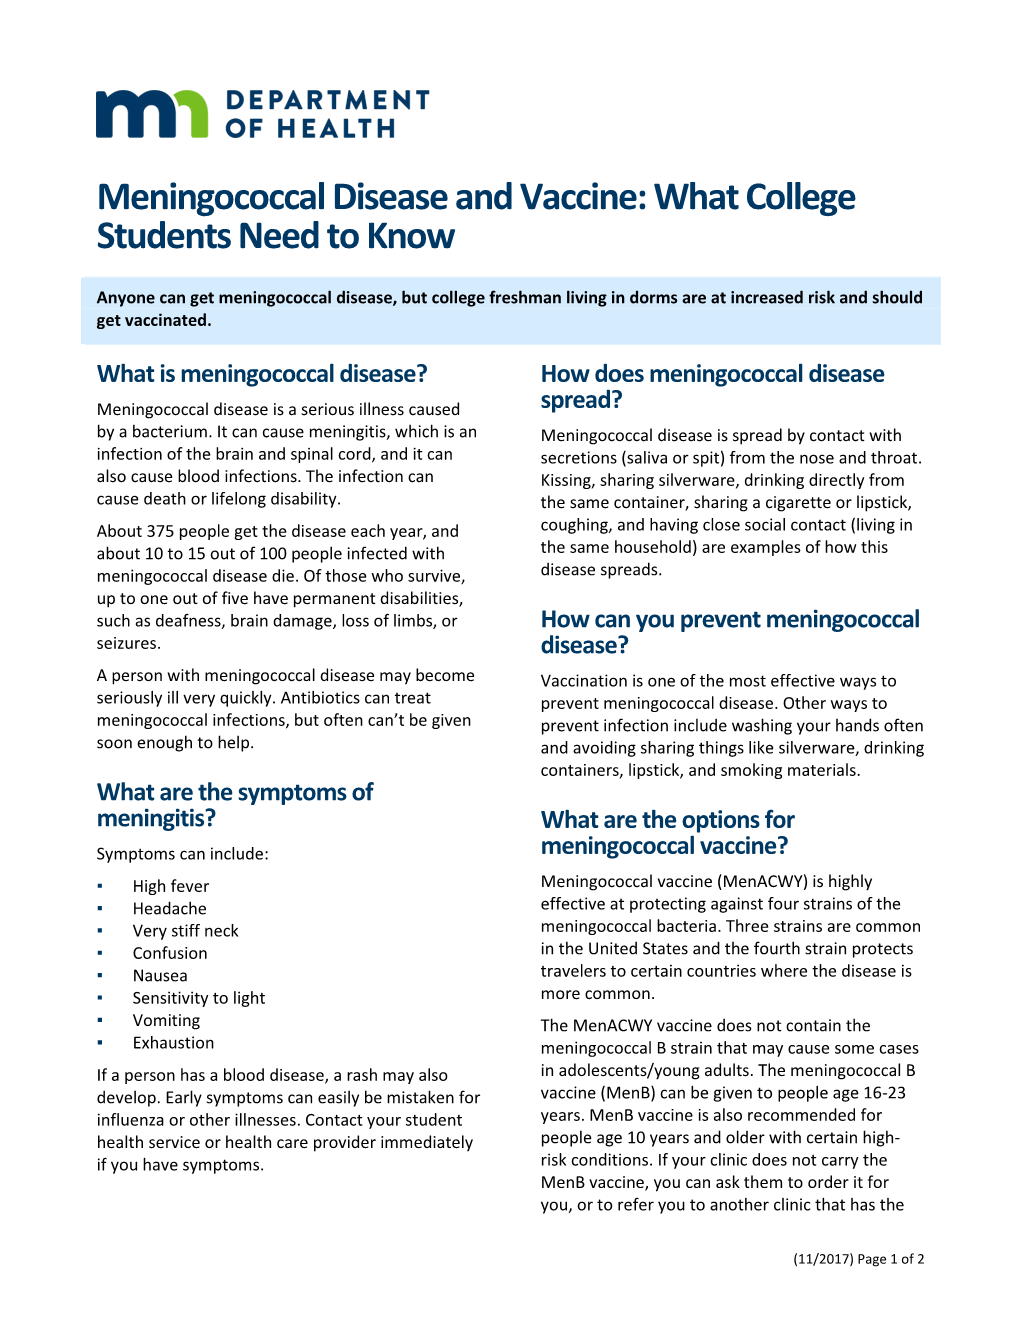 Meningococcal Disease and Vaccine: What College Students Need to Know